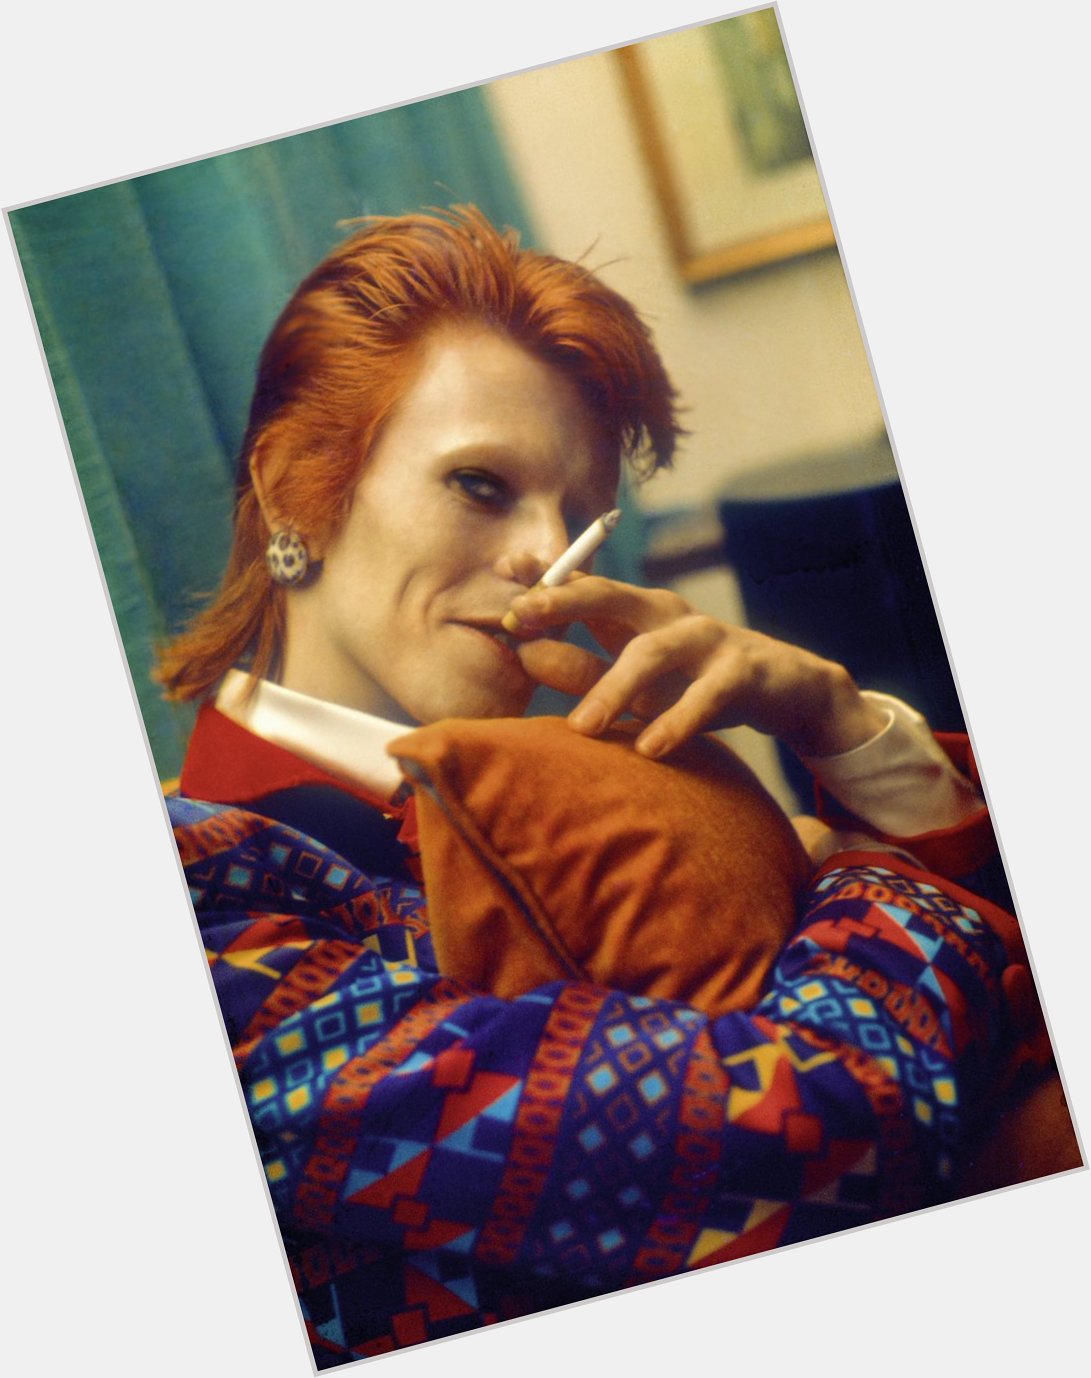 Happy 75th birthday to the one and only starman, david bowie. 